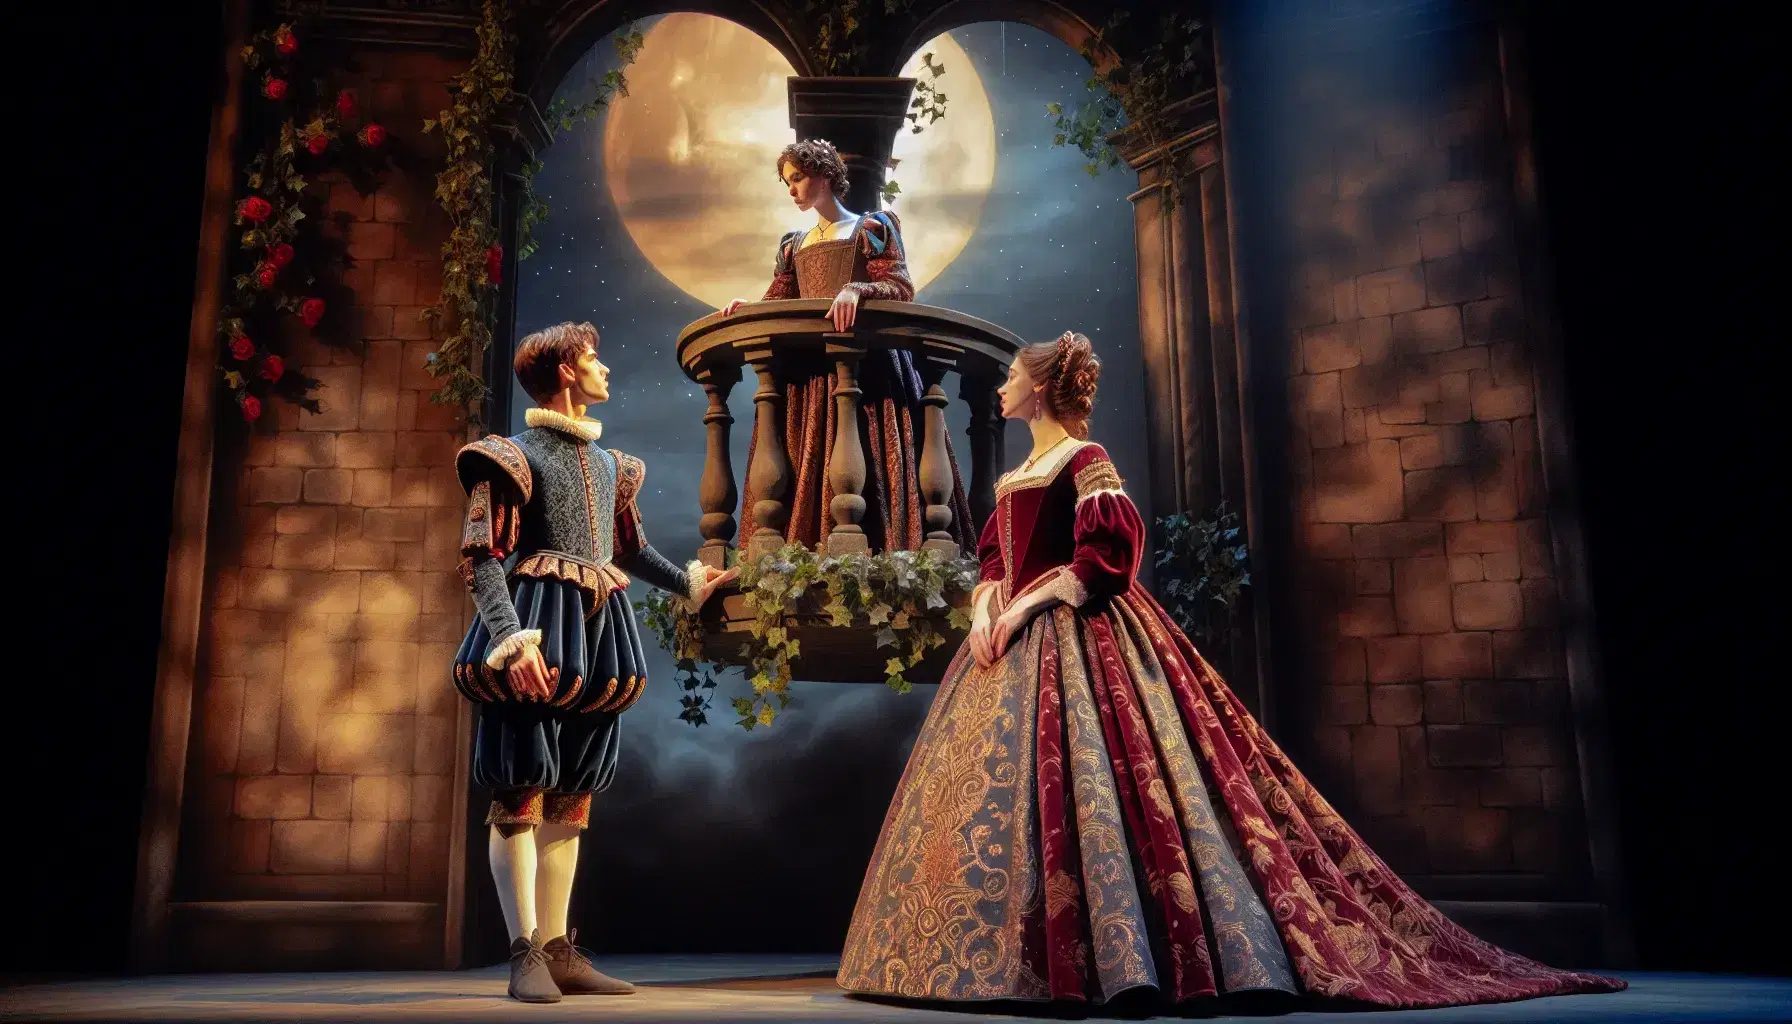 Romantic scene from a theater performance with two actors in Elizabethan costumes, one on a fake balcony and the other looking at him affectionately.